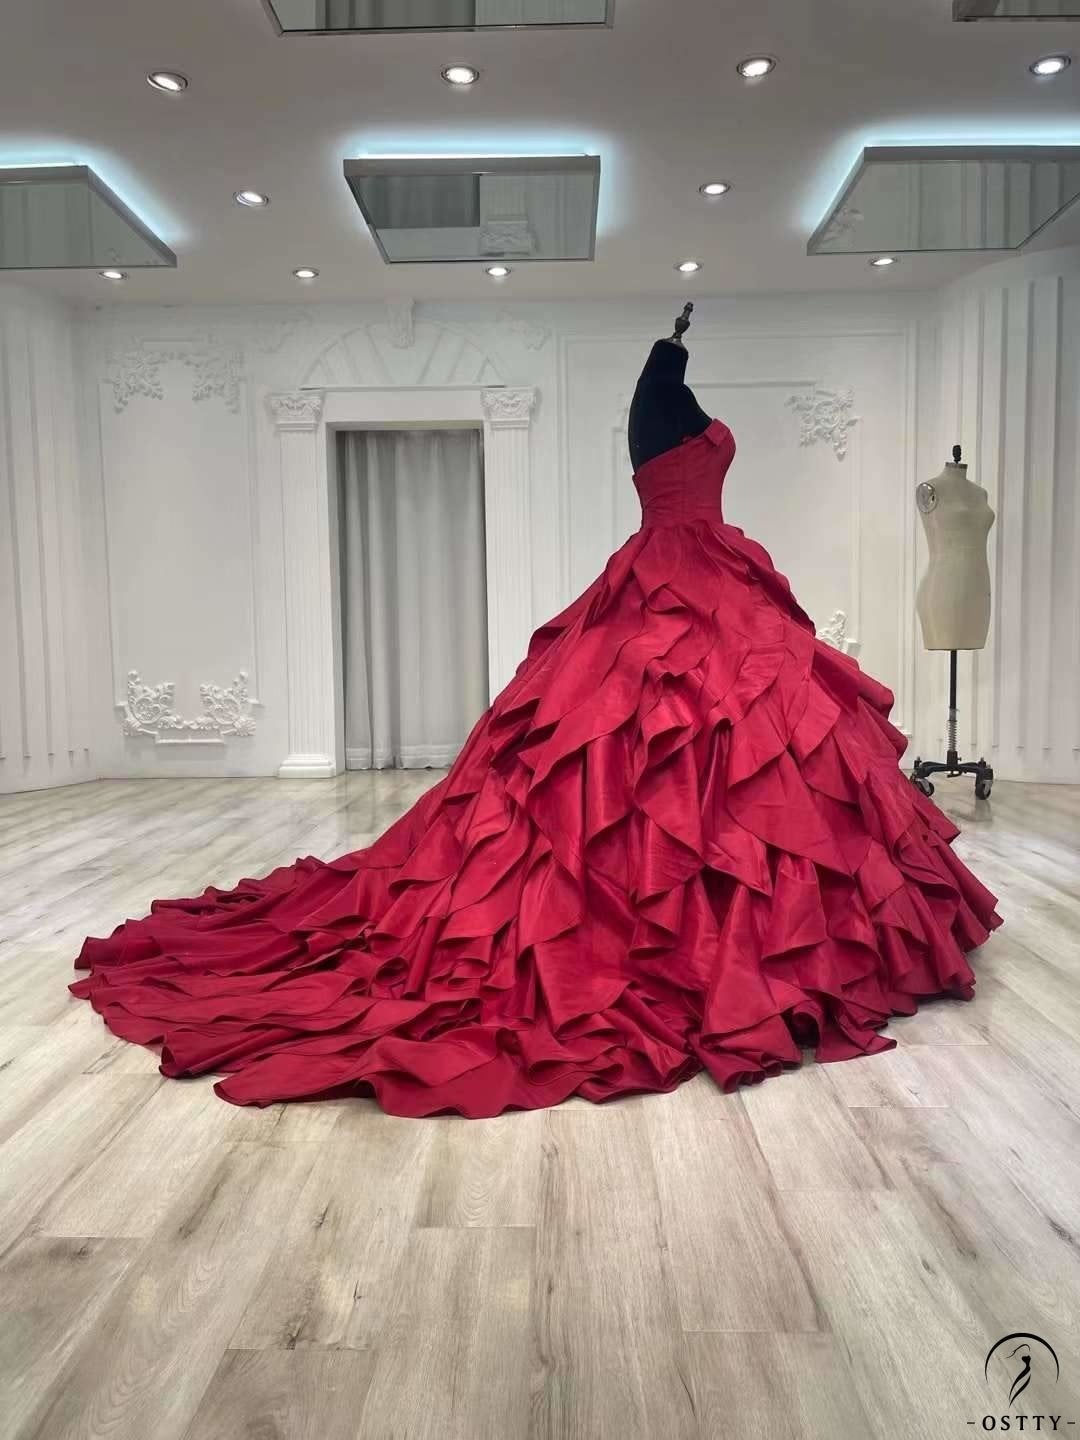 Strapless Wine Red Dress Ball Gown Ruffle Party Dresses OS01005 - Red Wedding Dress $699.99